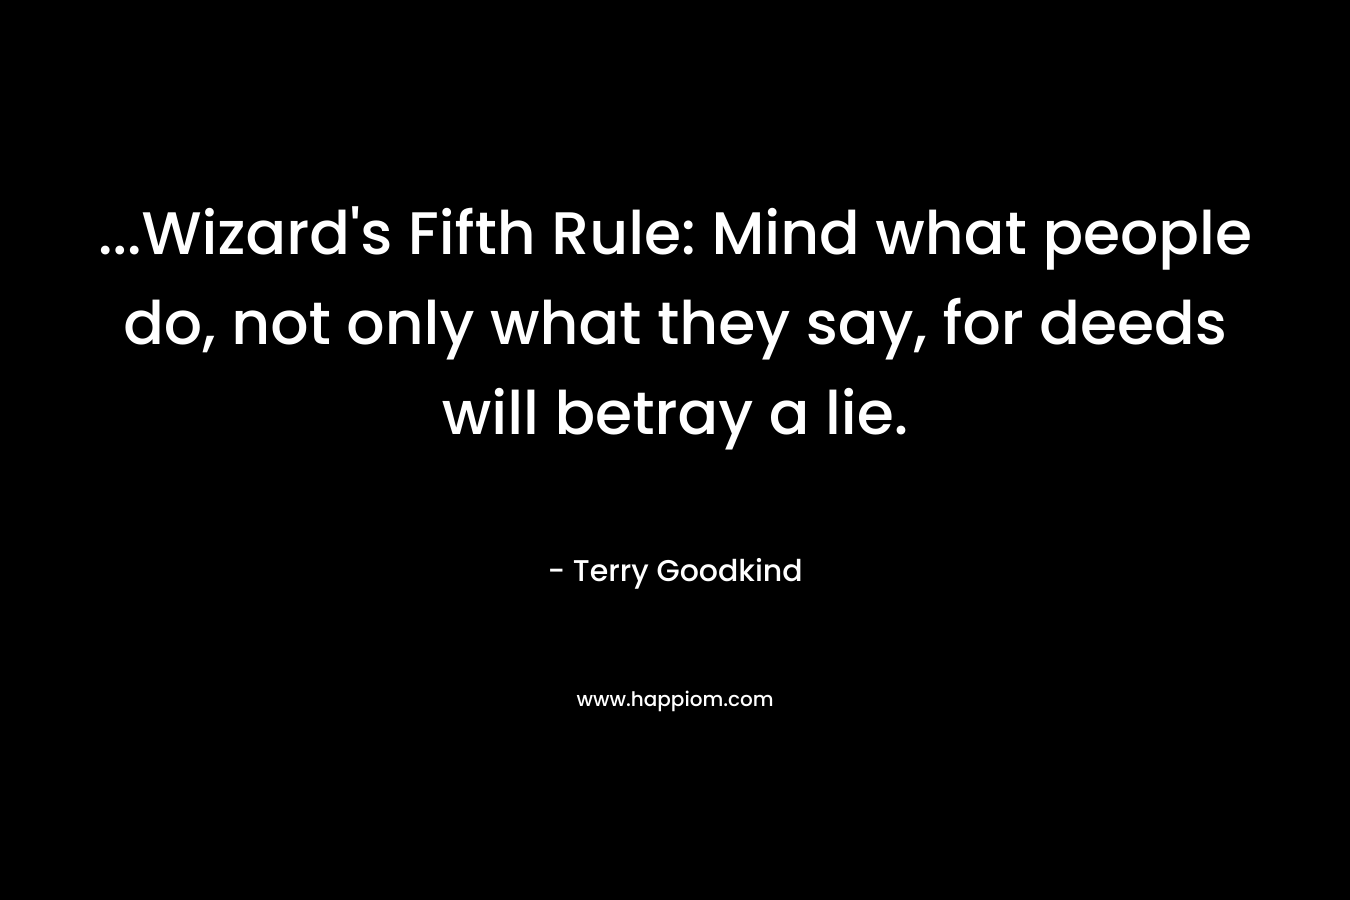 …Wizard’s Fifth Rule: Mind what people do, not only what they say, for deeds will betray a lie. – Terry Goodkind